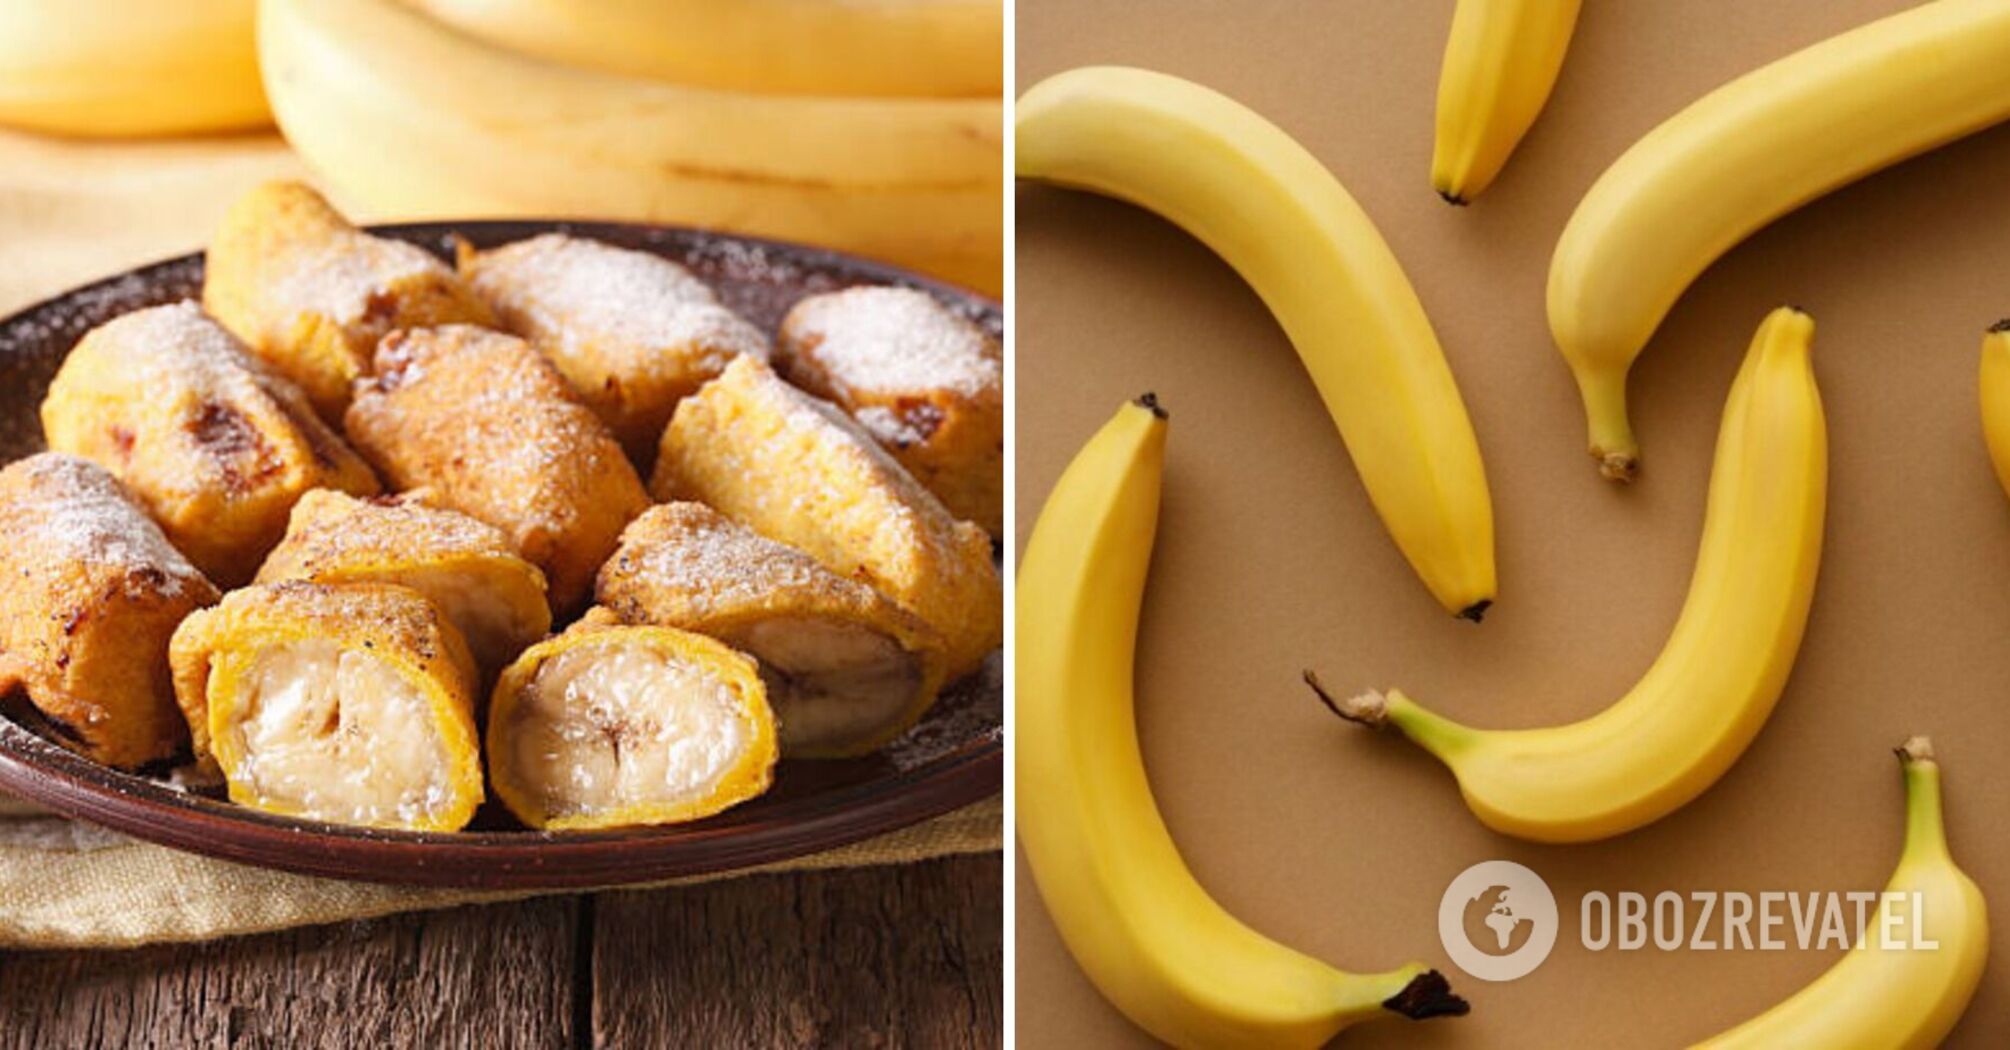 Banana in batter in 5 minutes: a low-calorie dessert that even children can eat